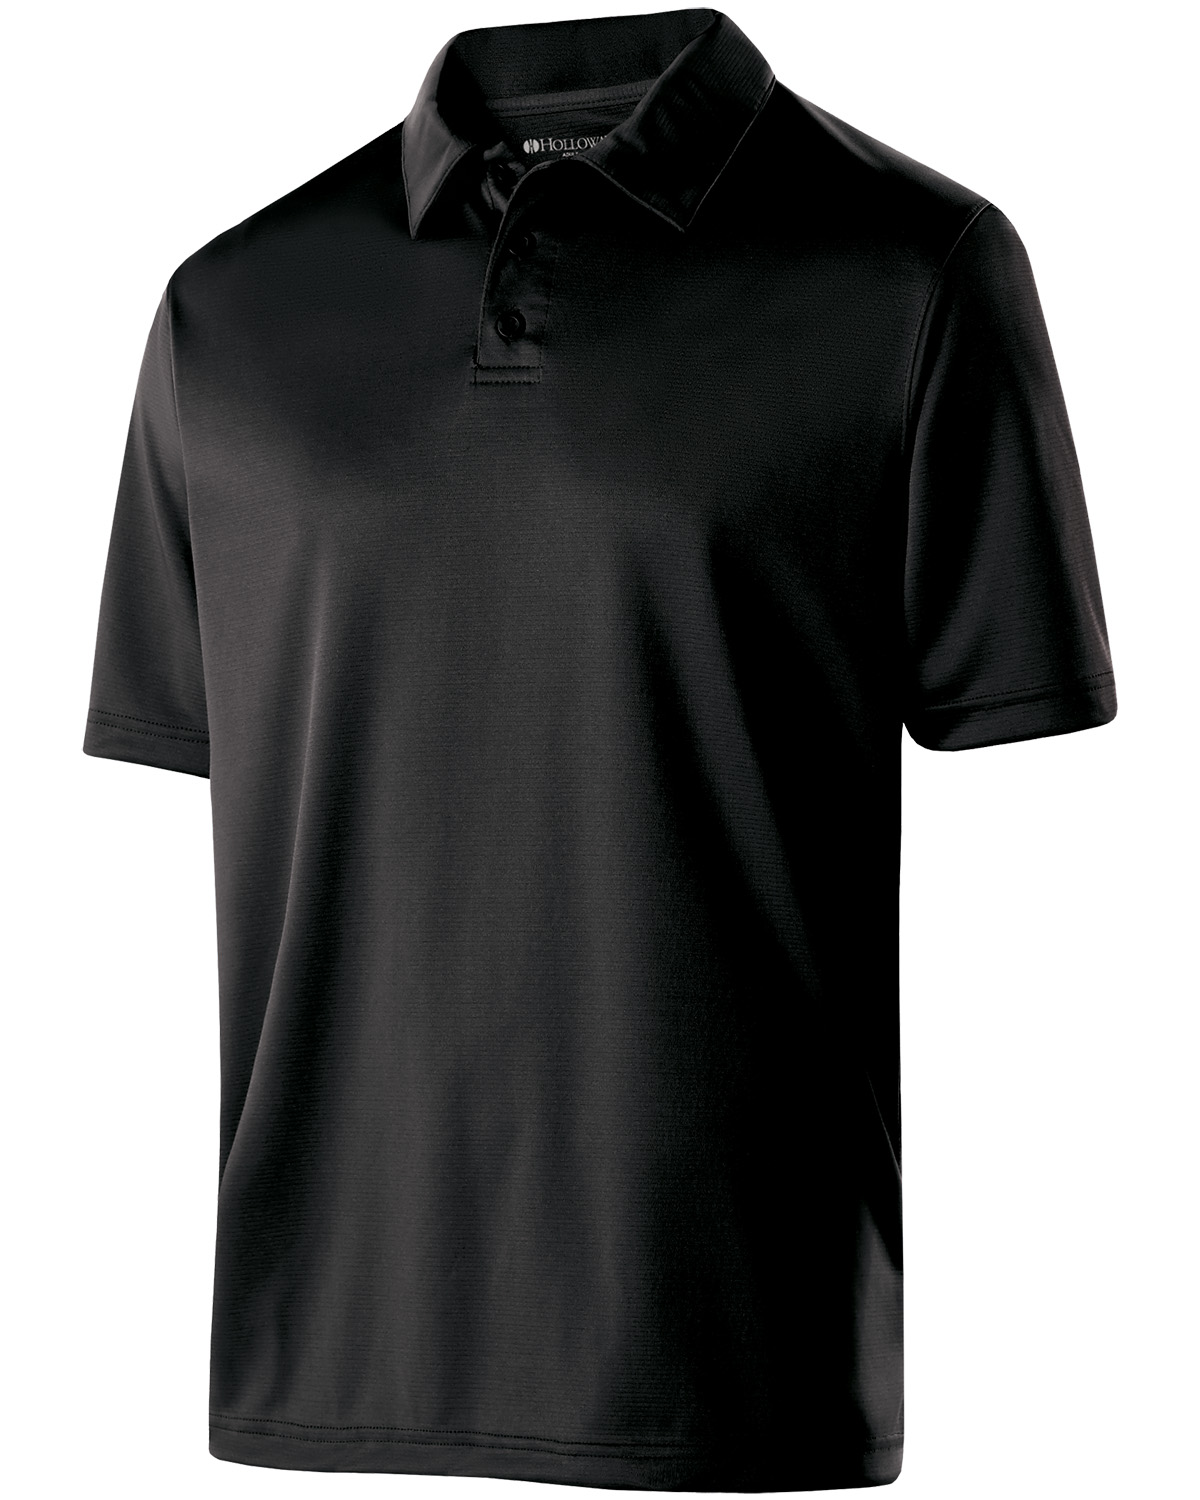 Holloway 222519 - Adult Polyester Textured Stripe Shift Polo